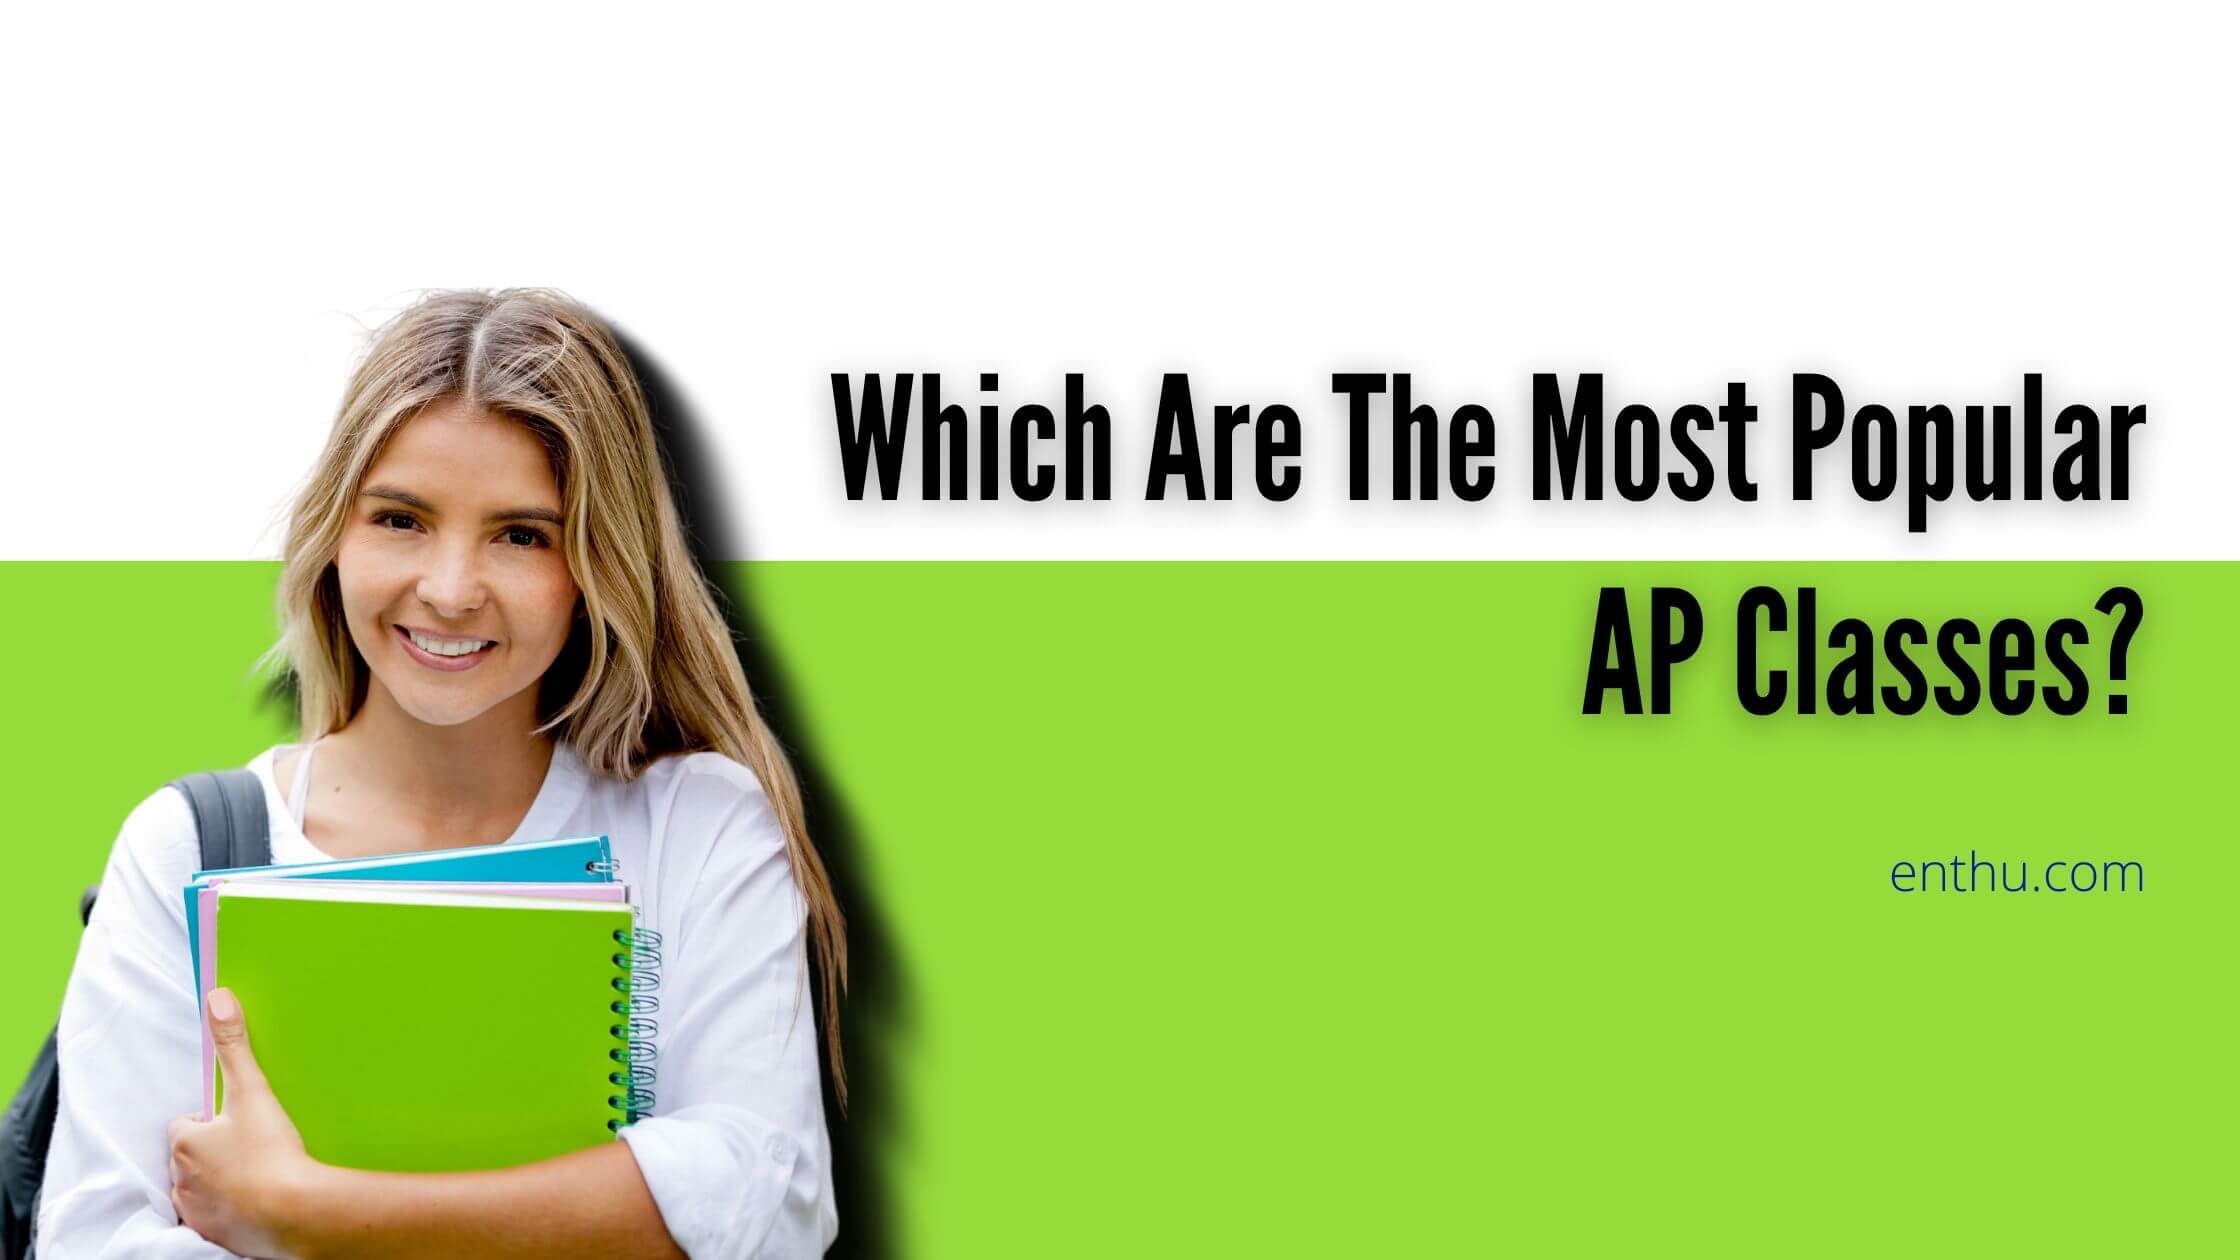 do ap classes have a lot of homework